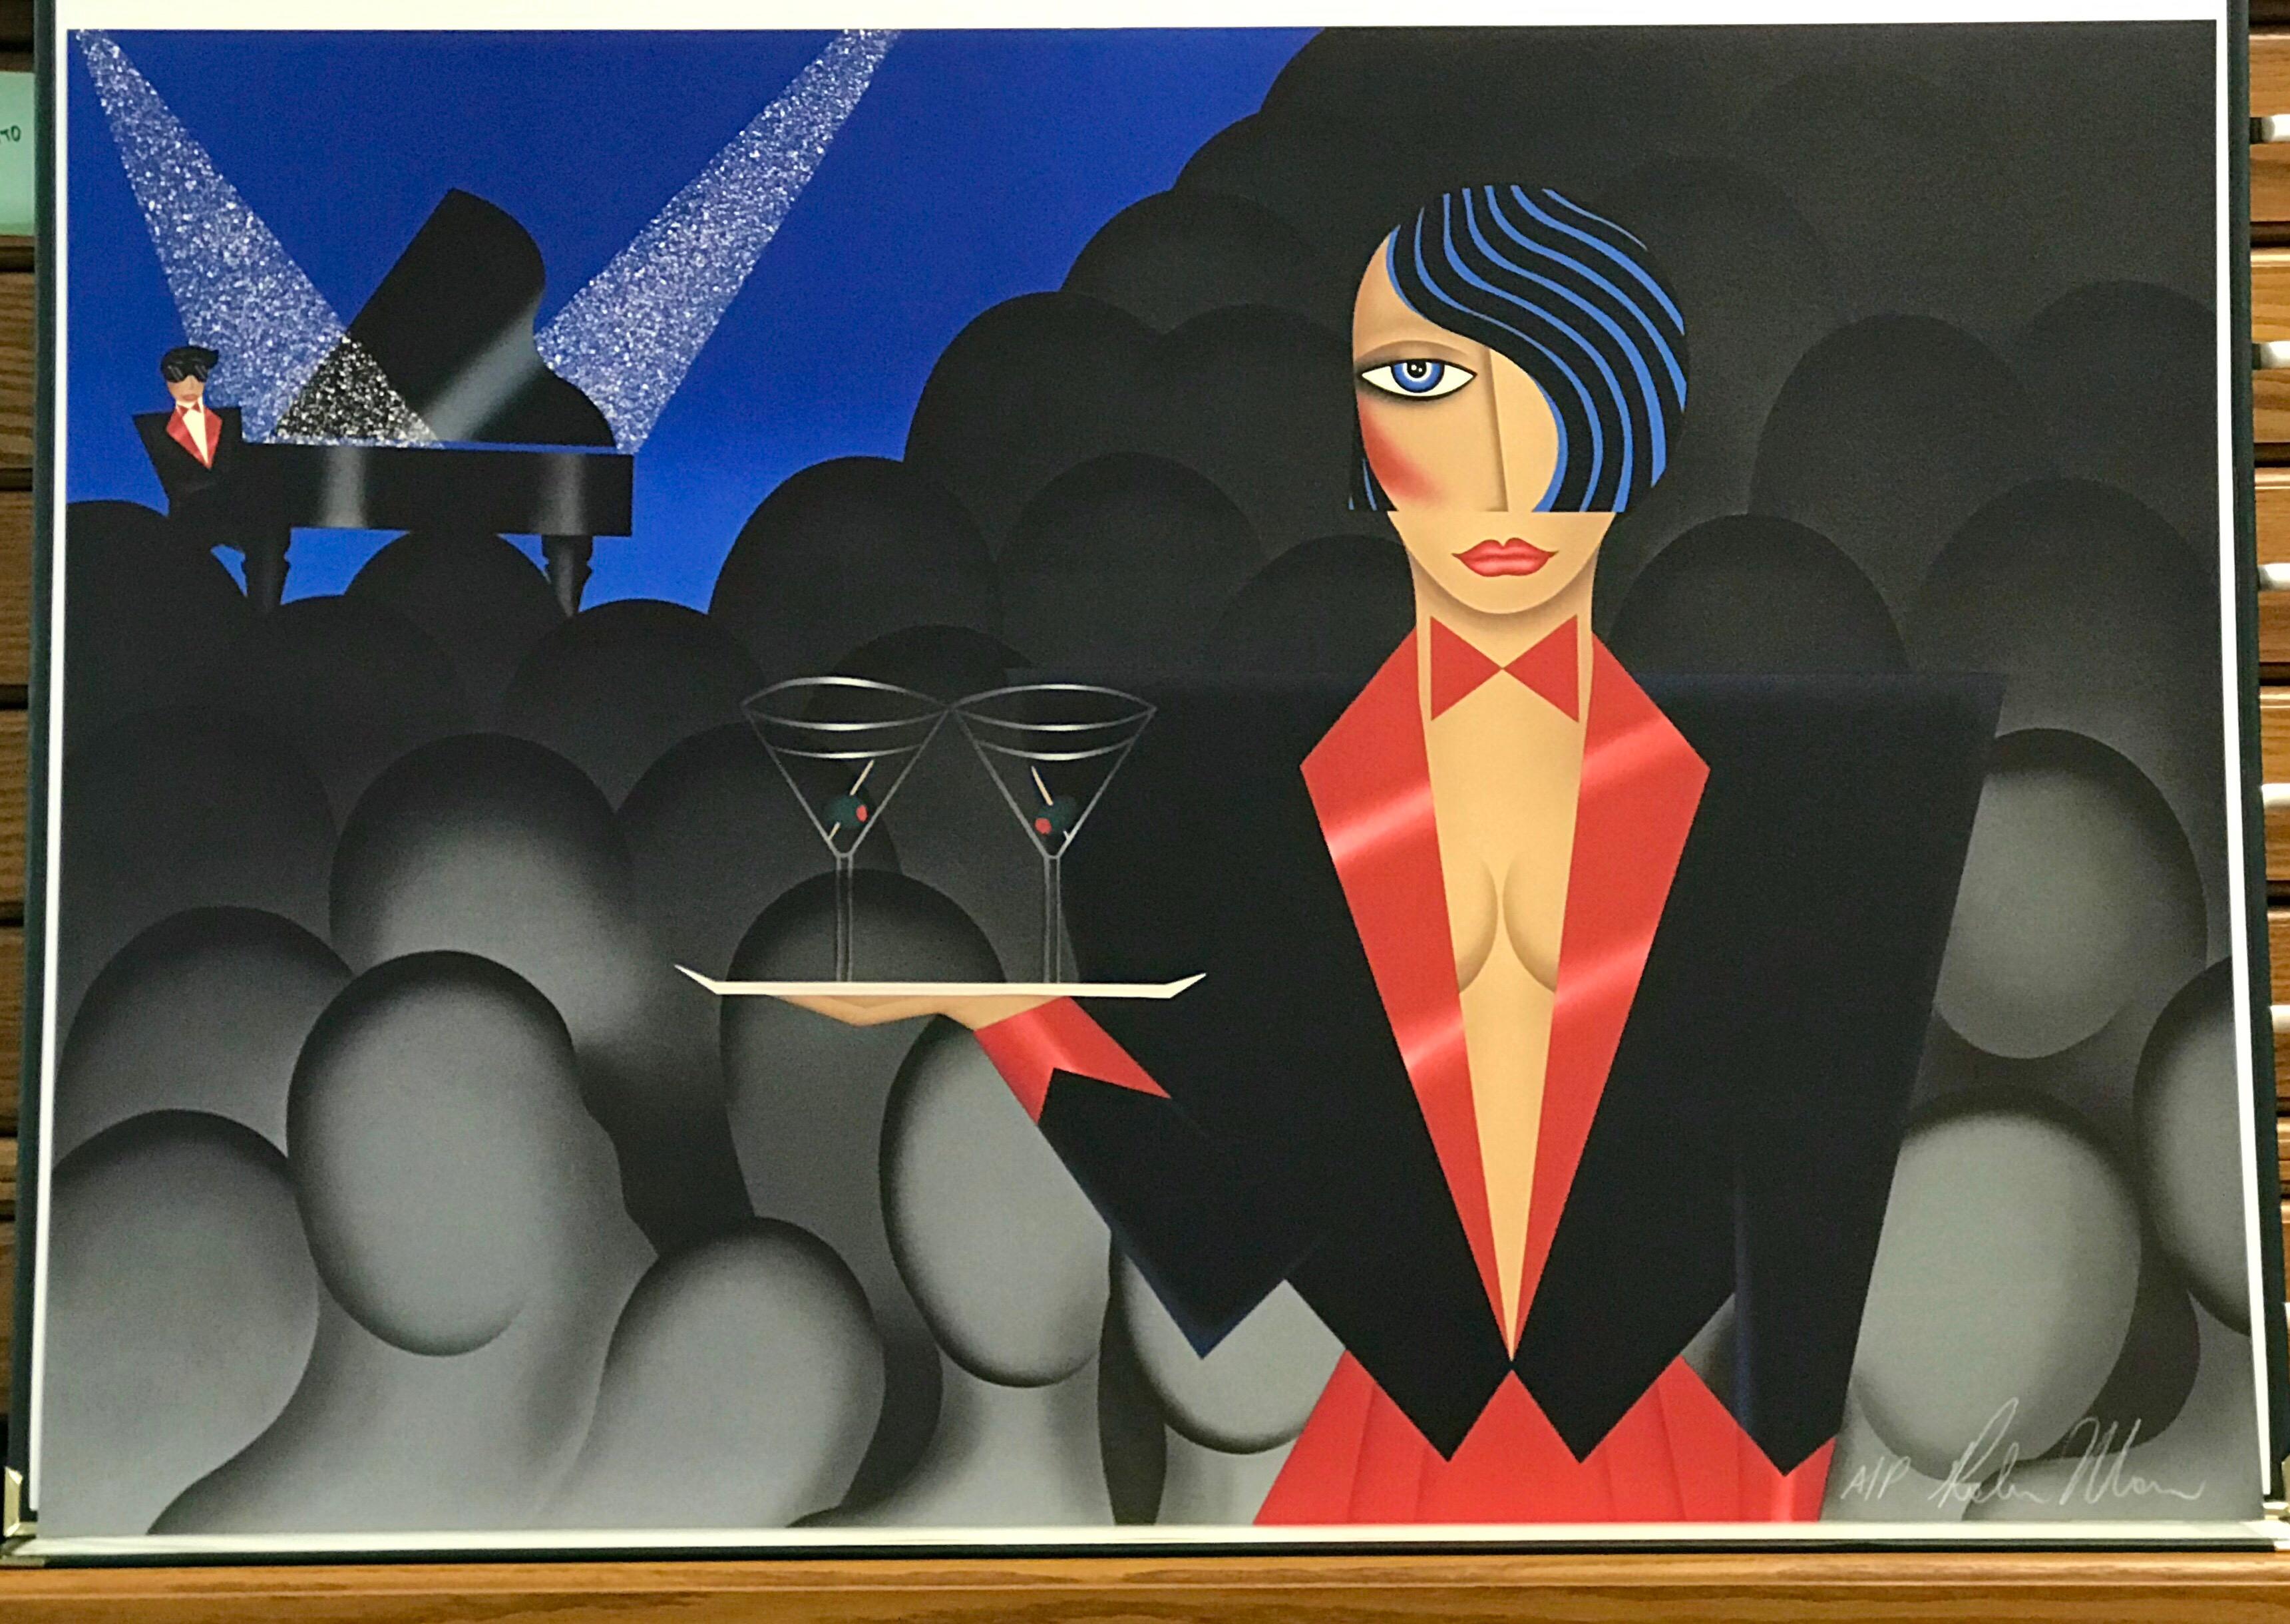 ALONE IN A CROWD Signed Lithograph, Woman Cocktail Waitress, Martini, Art Deco  - Print by Robin Morris